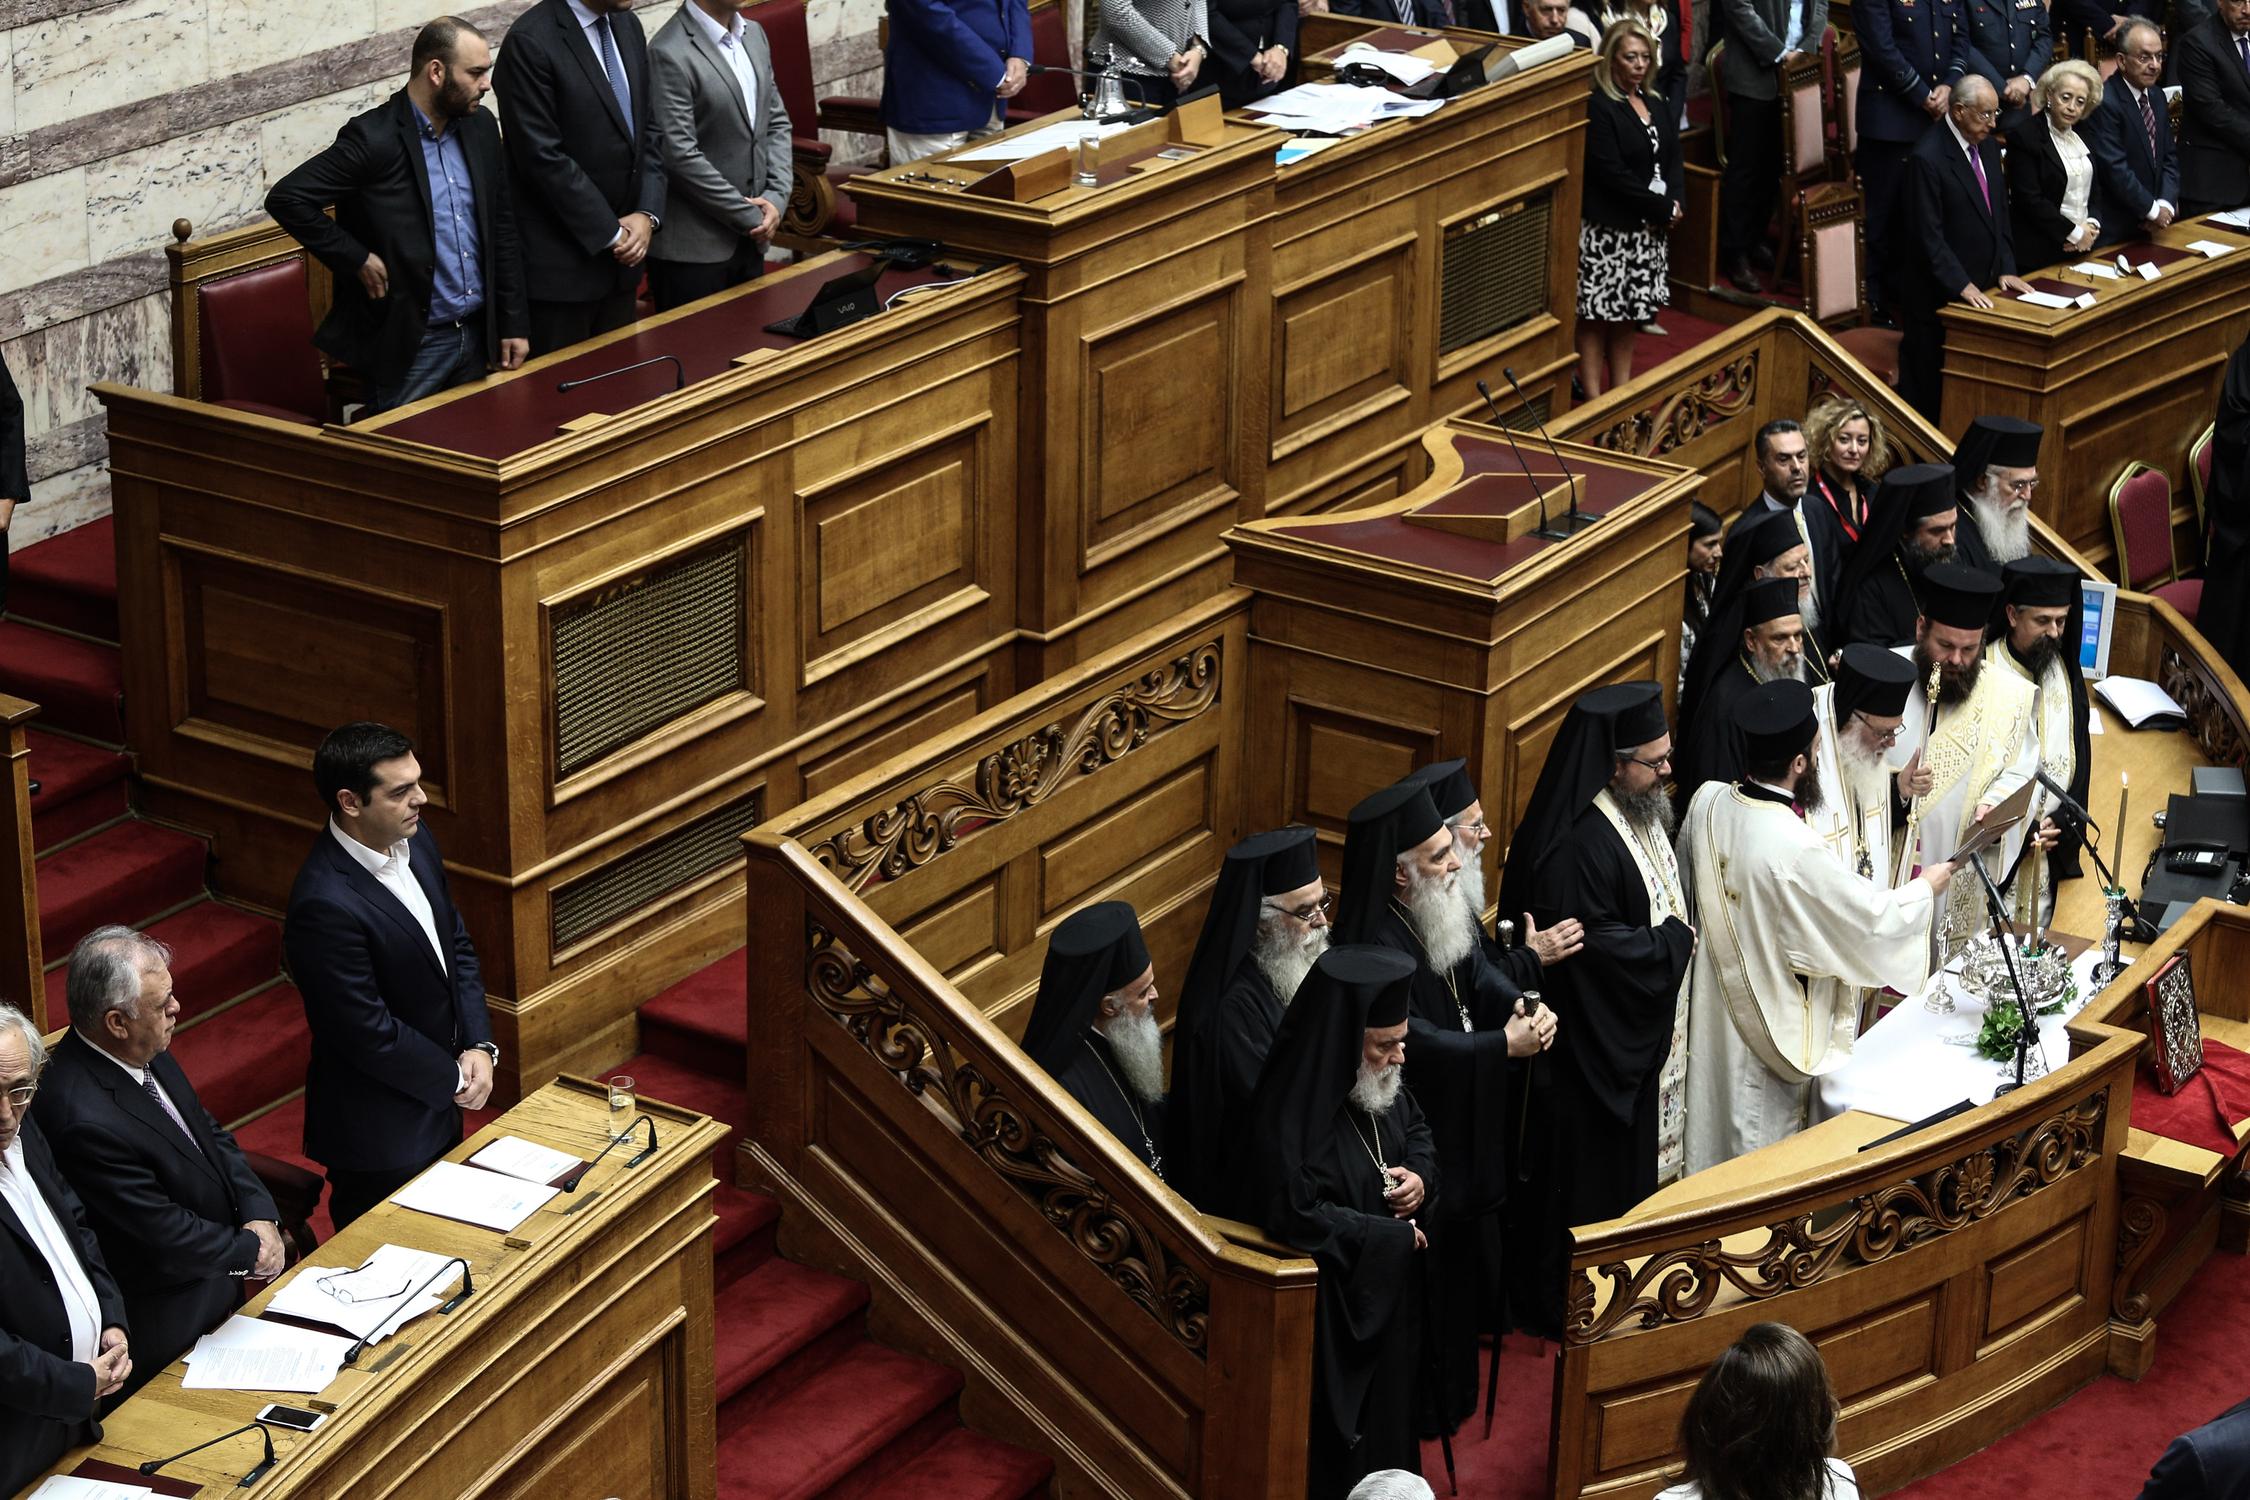 Swearing-in ceremony of the new Greek Parliament in Athens, Greece on Oct. 3, 2015. / Ορκωμοσία της νέας Βουλής, Αθήνα, Ελλάδα στις 3 Οκτωβρίου 2015.